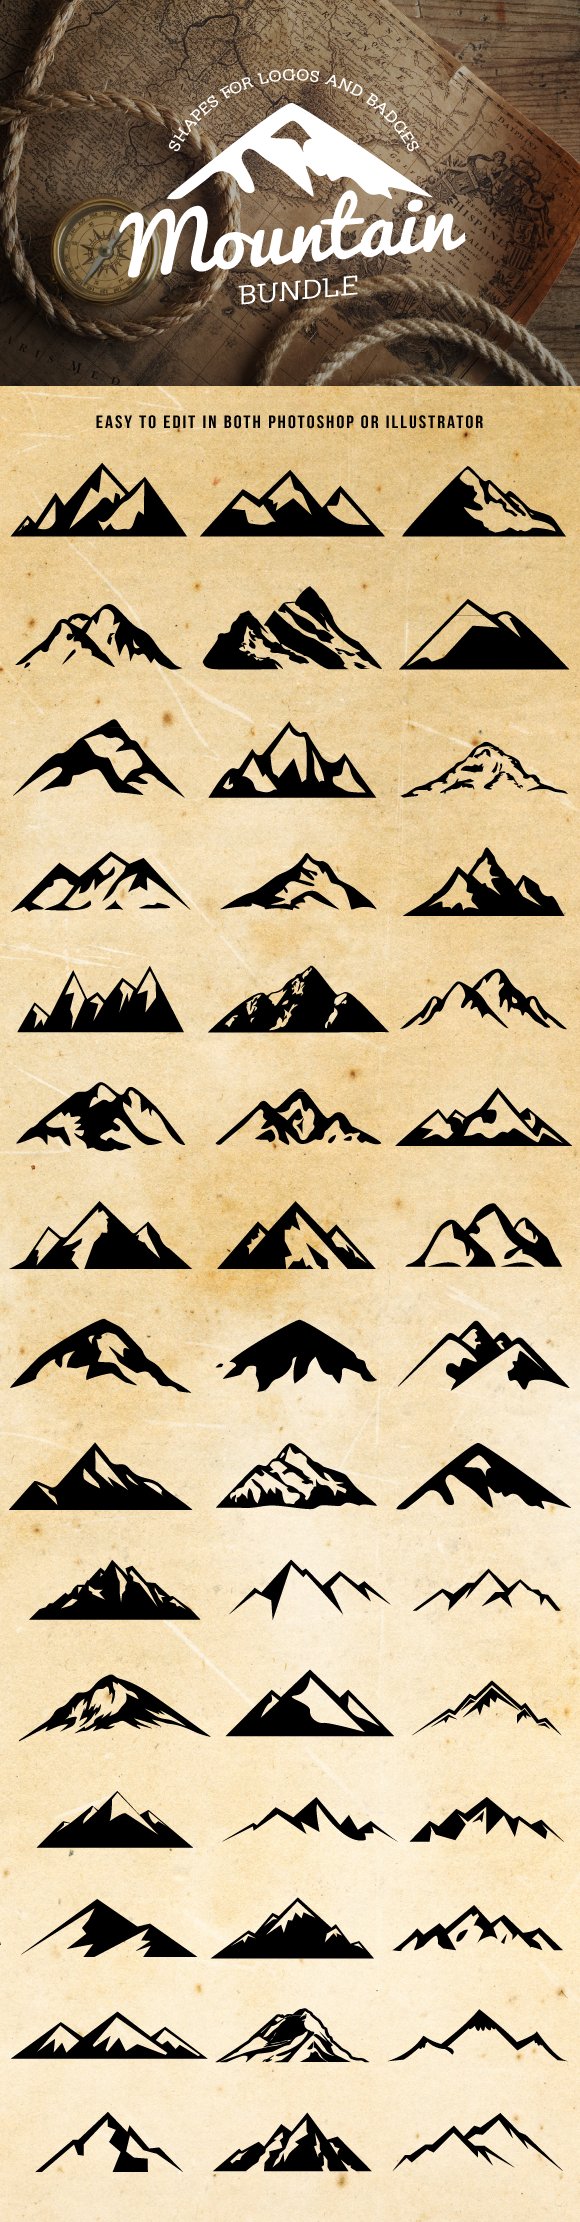 Mountain Shapes For Logos Bundlecover image.